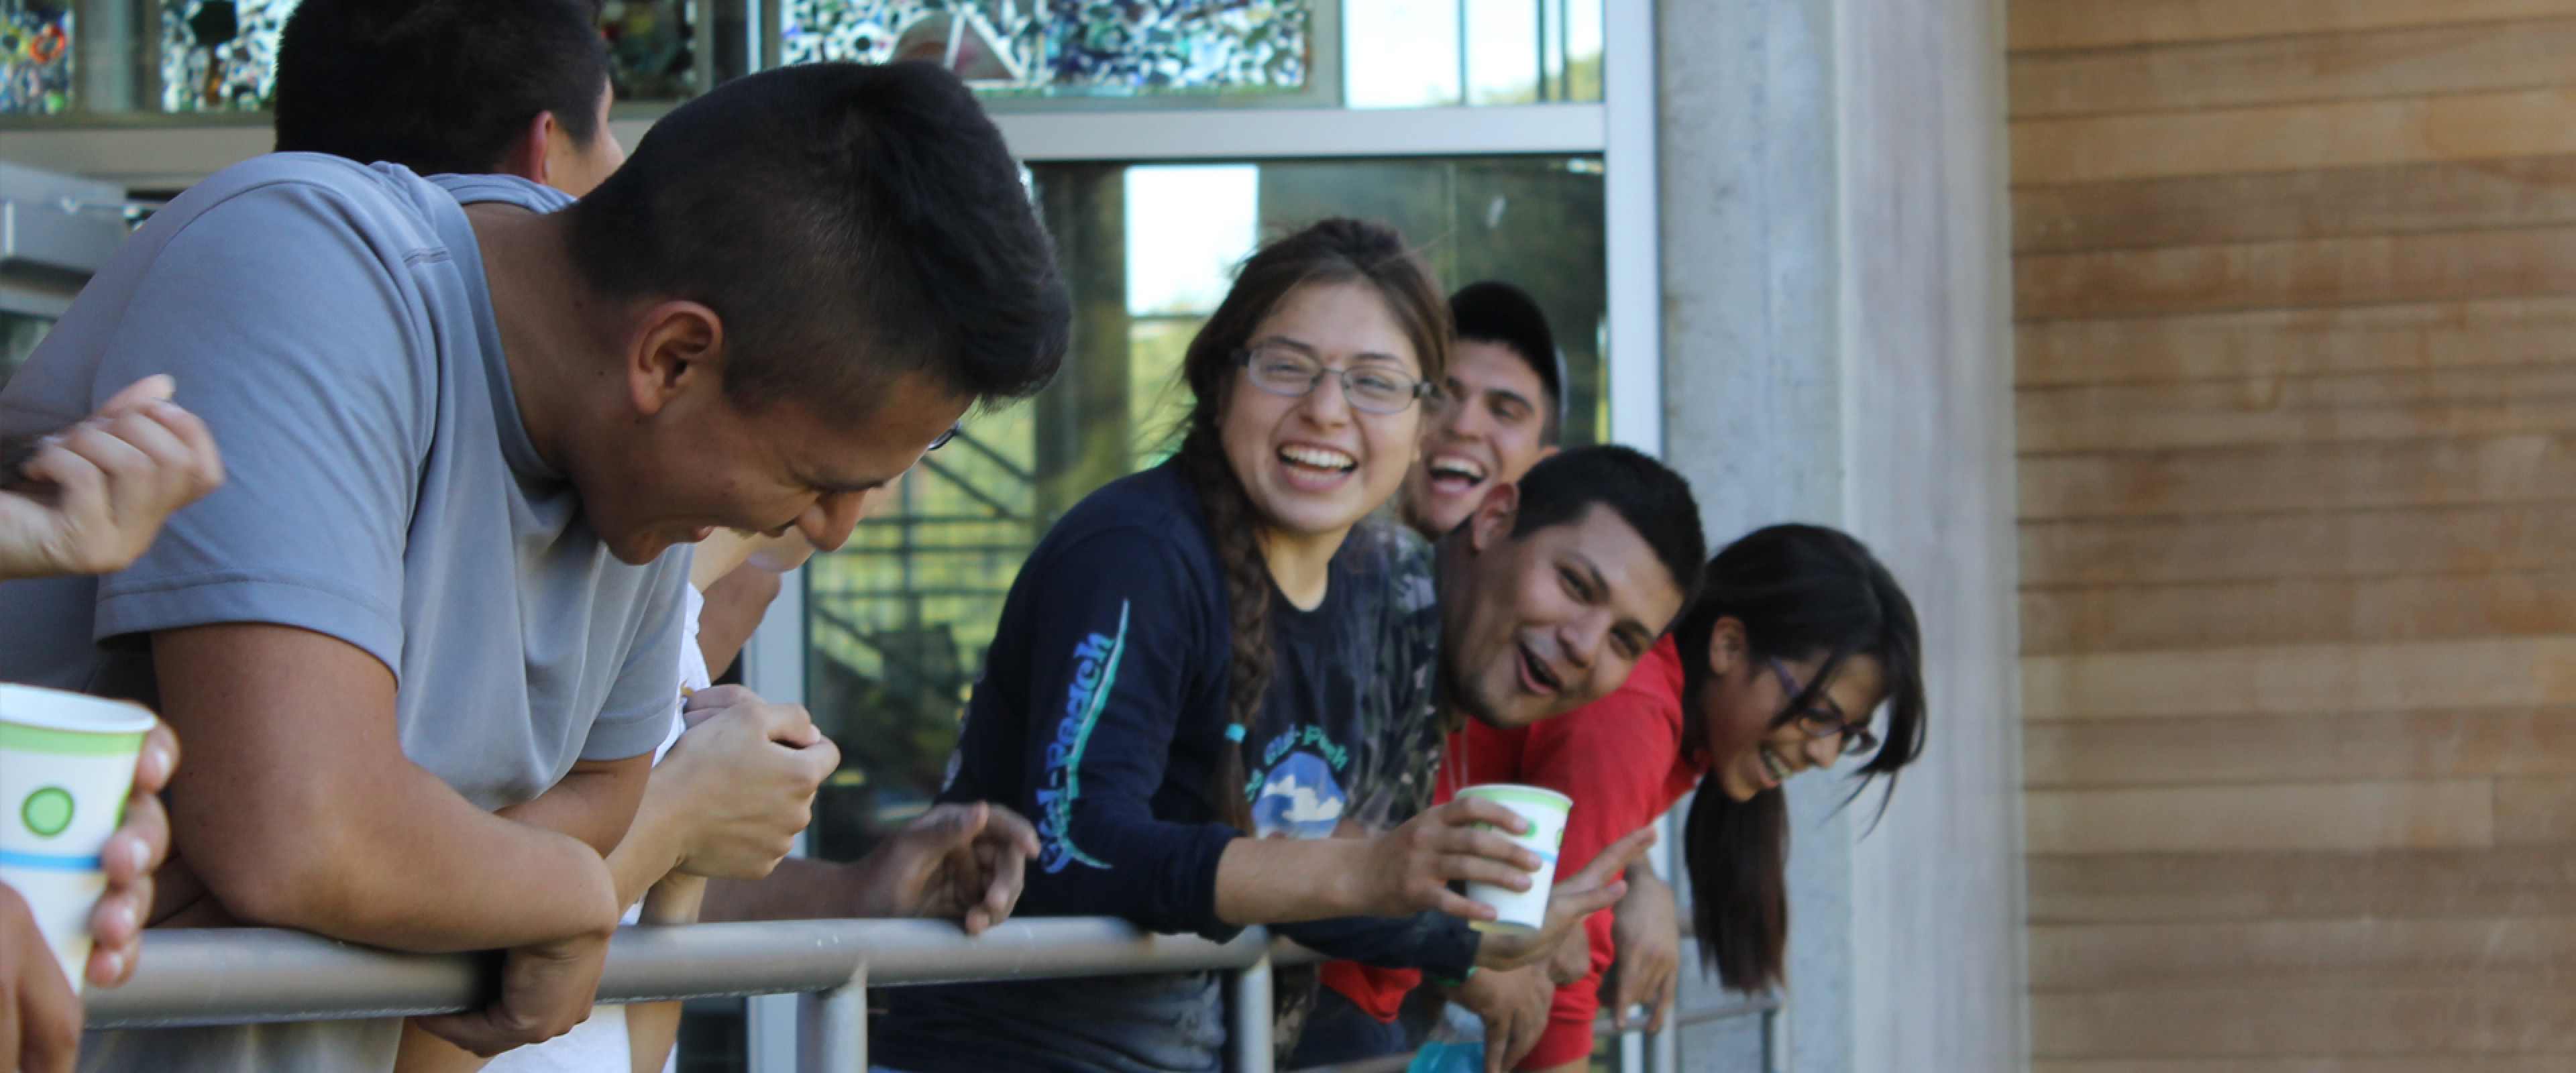 A group of students laughing over a ledge.